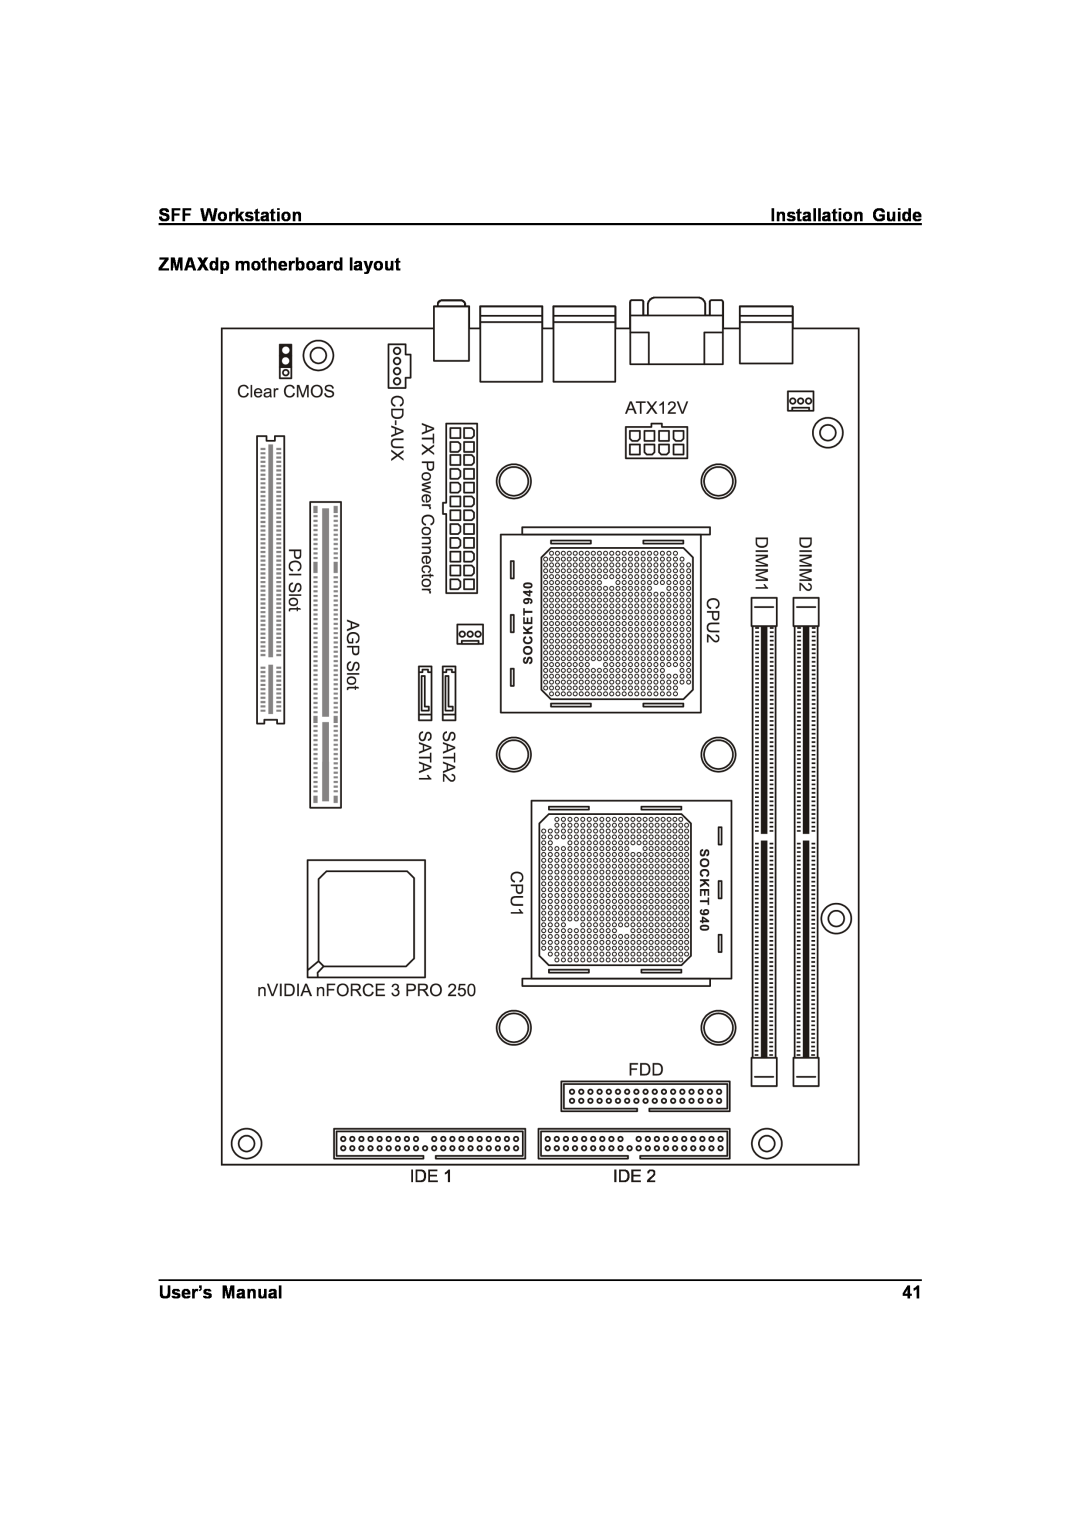 IBM user manual SFF Workstation, ZMAXdp motherboard layout, User’s Manual, Installation Guide 